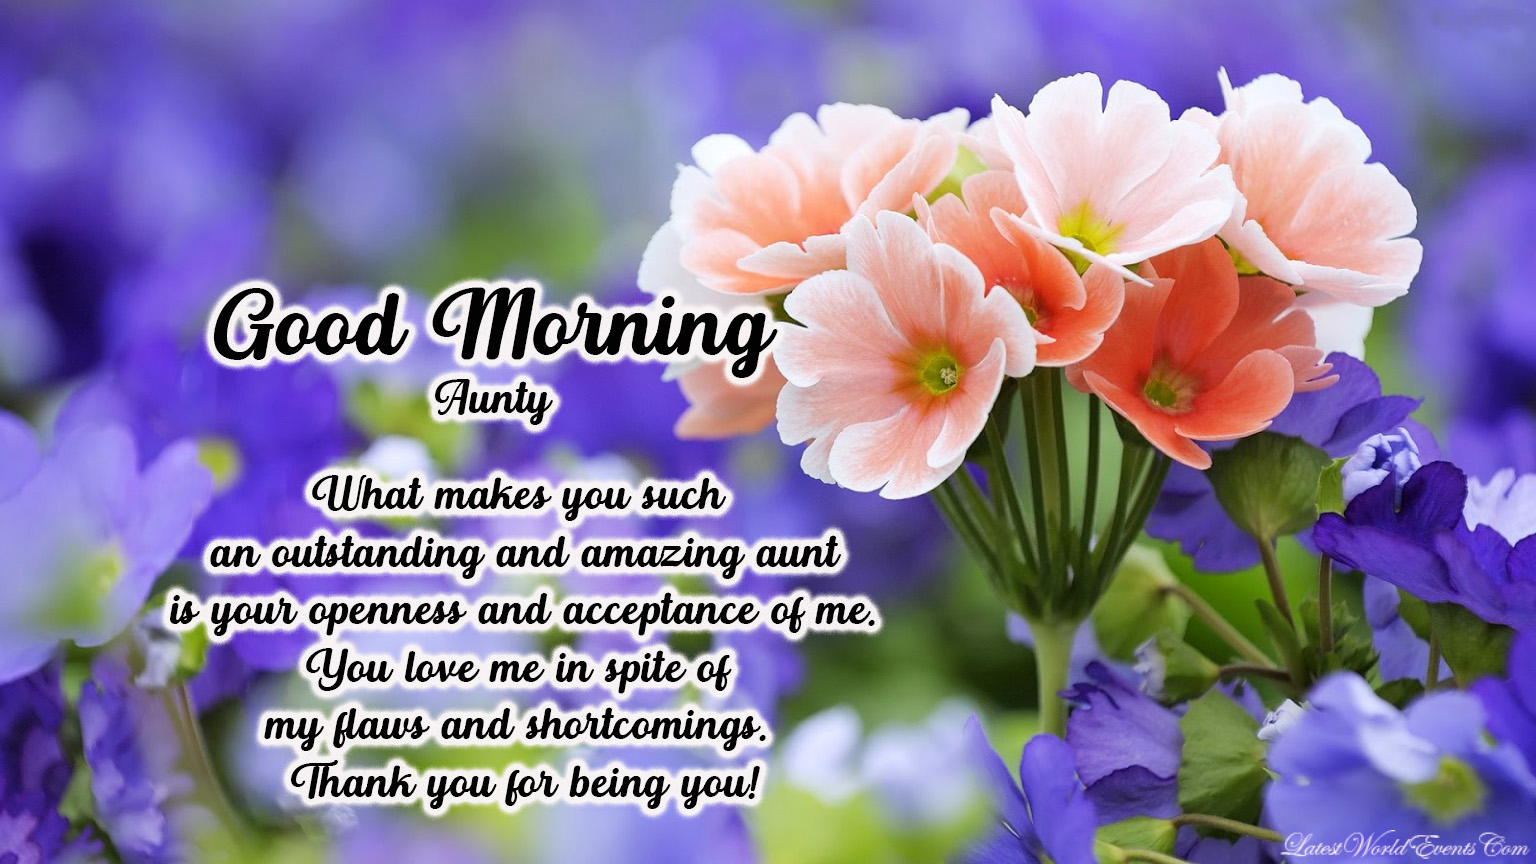 Good Morning Quotes For My Aunt - Latest World Events